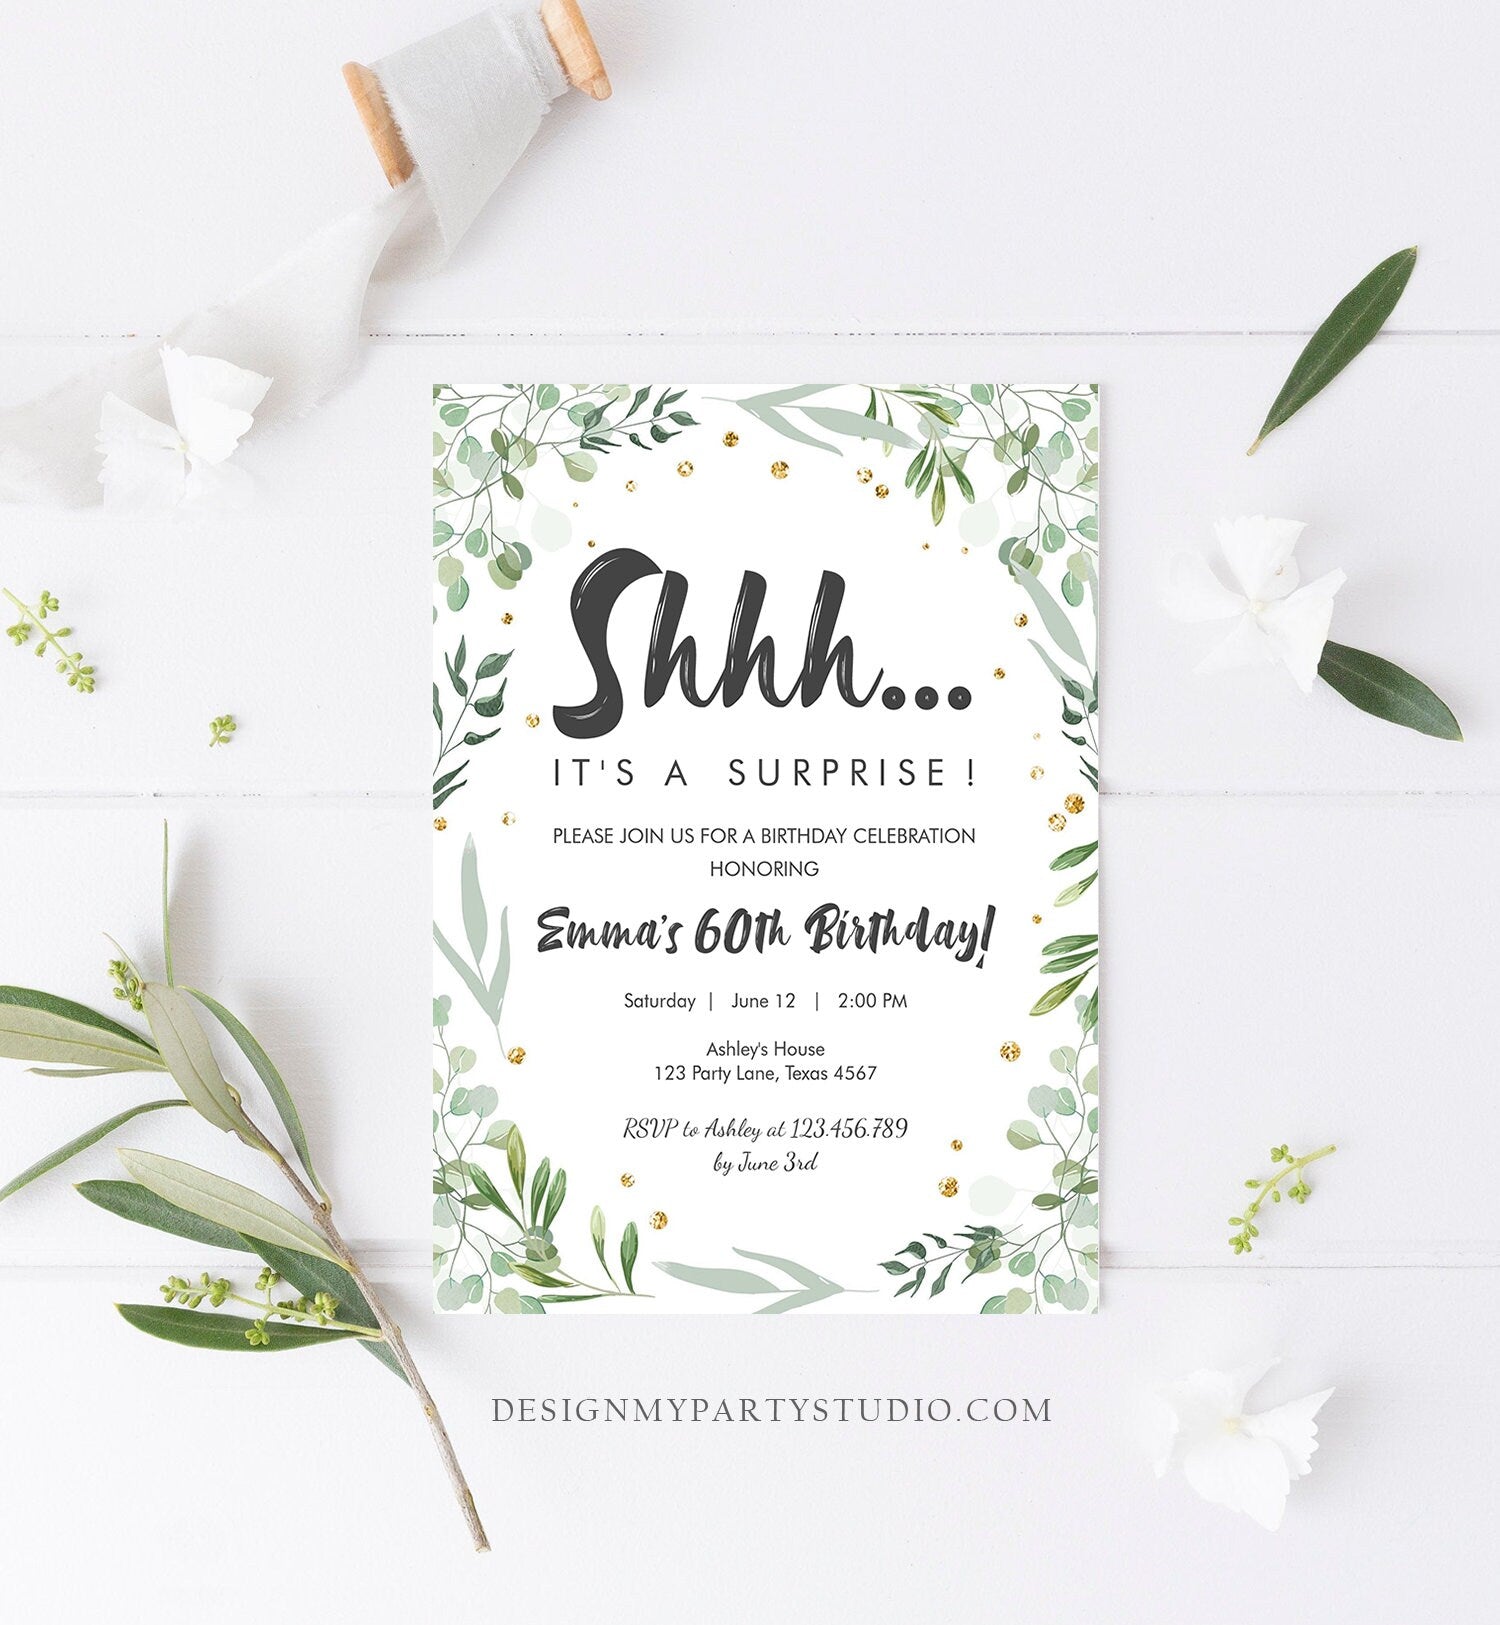 Editable Greenery Surprise Birthday Invitation ANY AGE Shhh Its It's A Surprise 30th 50th 60th Birthday Party Corjl Template Printable 0253